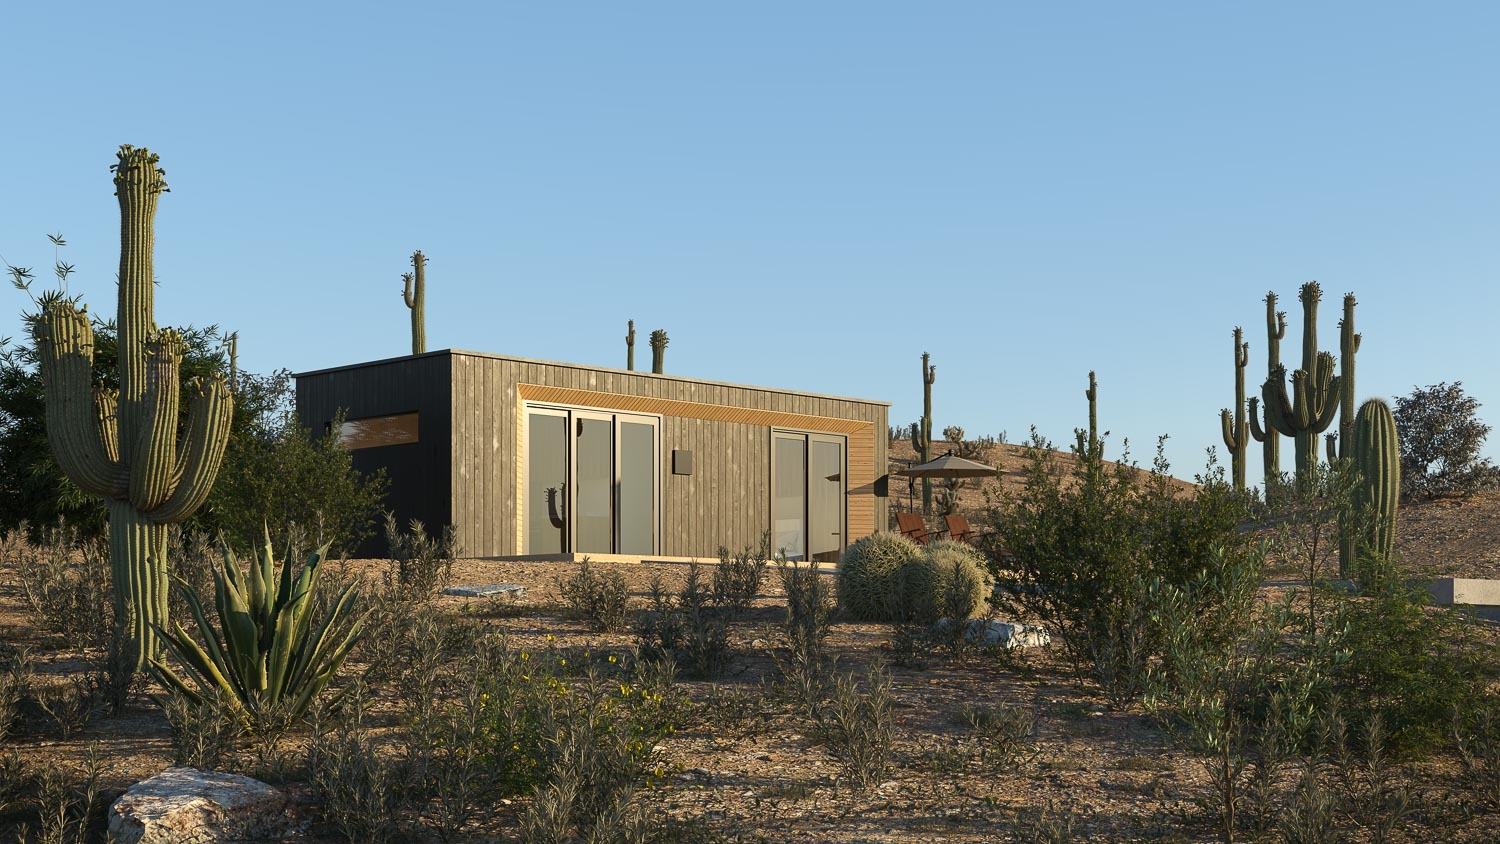 Modal ADU with gray wooden cladding in a desert surrounded by cacti